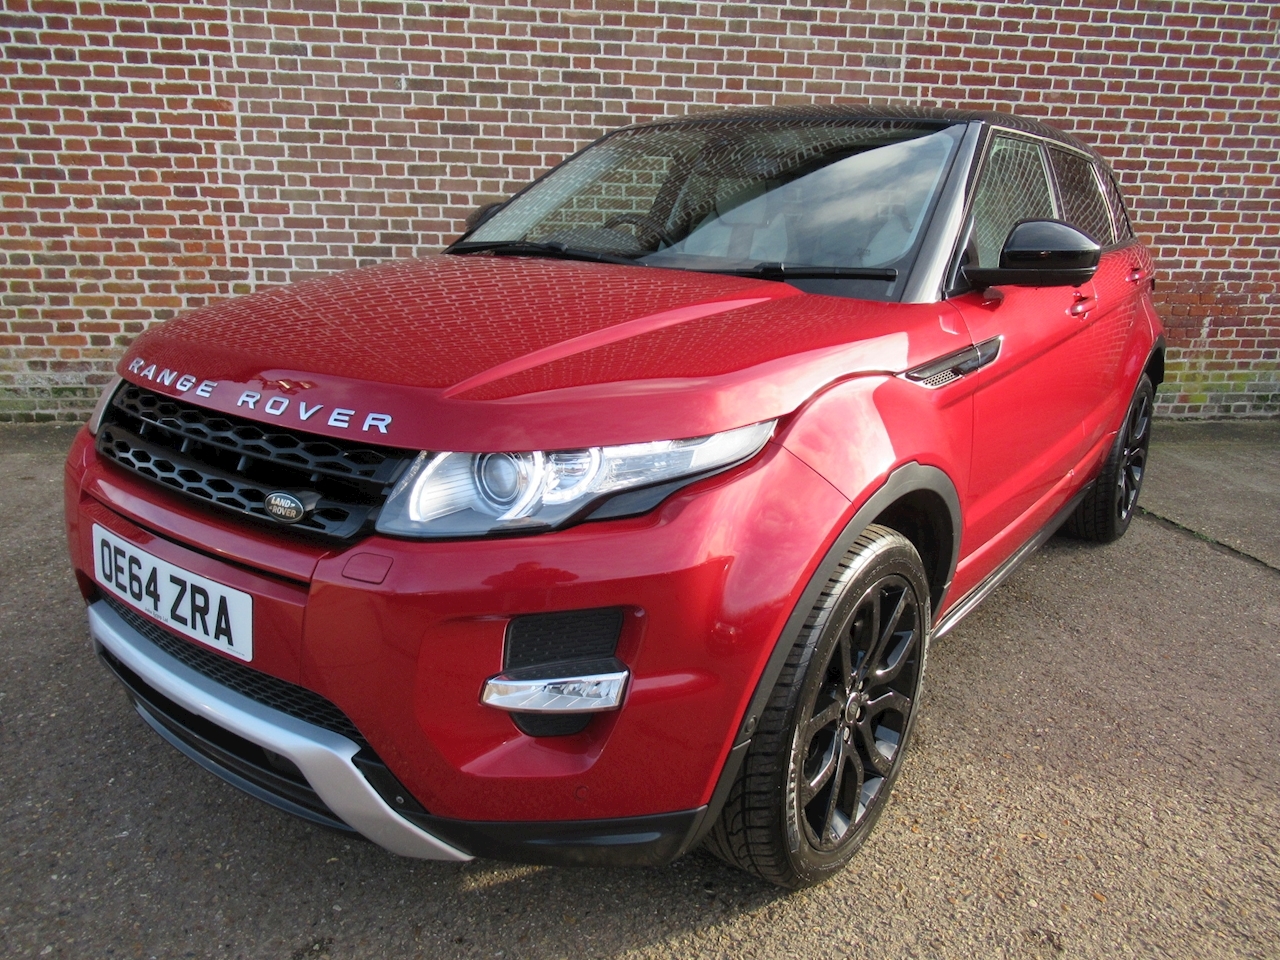 Range Rover Evoque 20152018 Review  Performance  Pricing  carwow